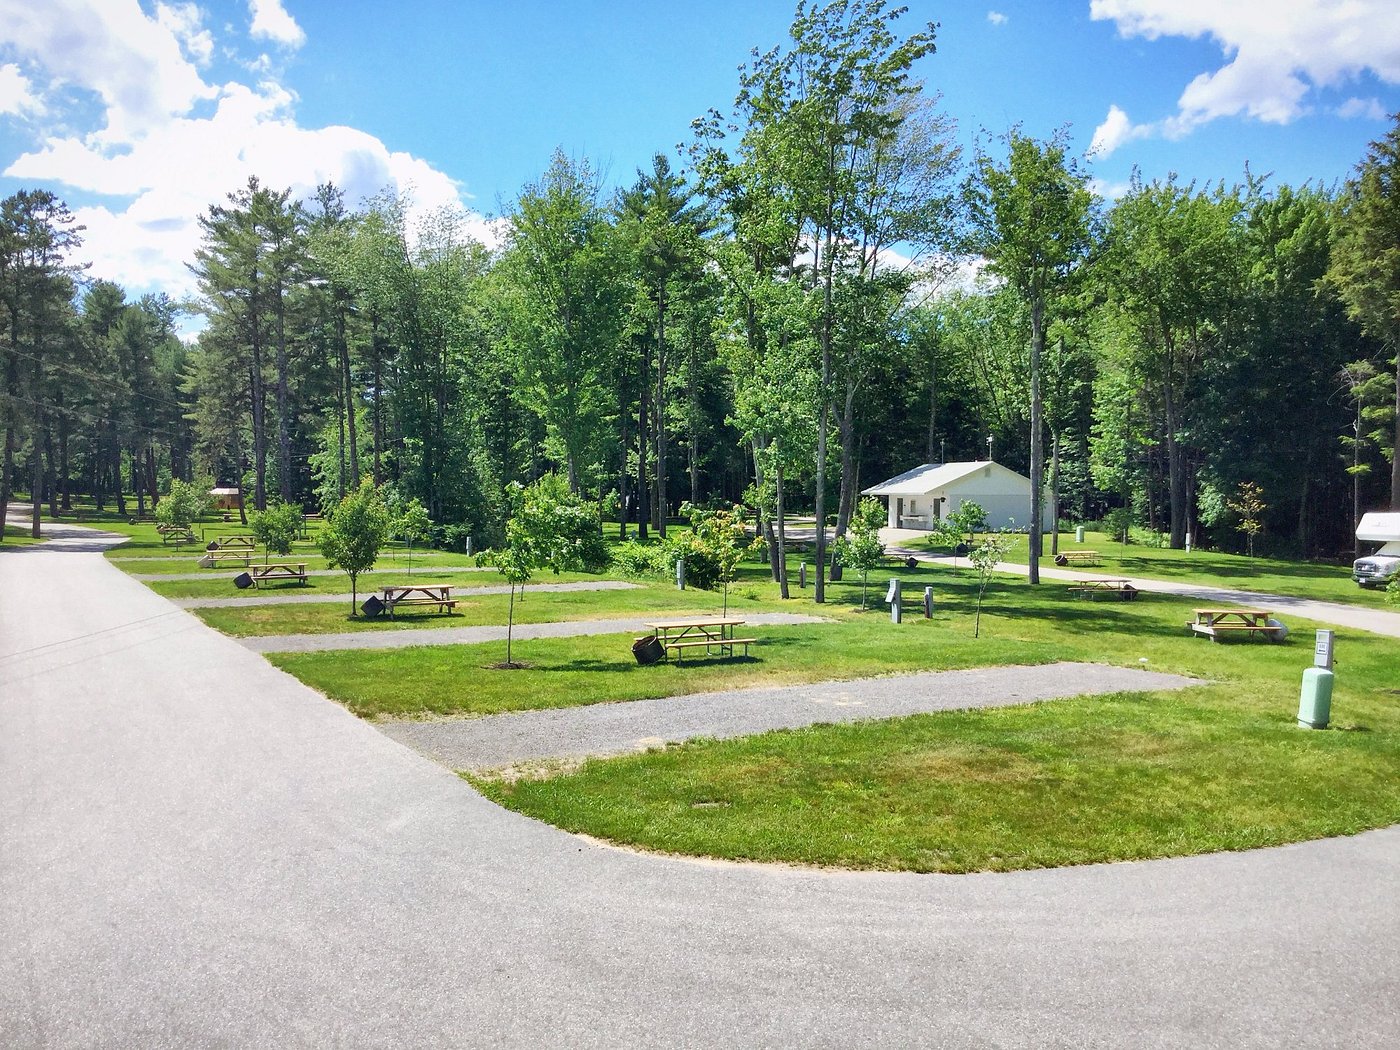 POWDER HORN FAMILY CAMPING RESORT Updated 2023 Prices & Campground